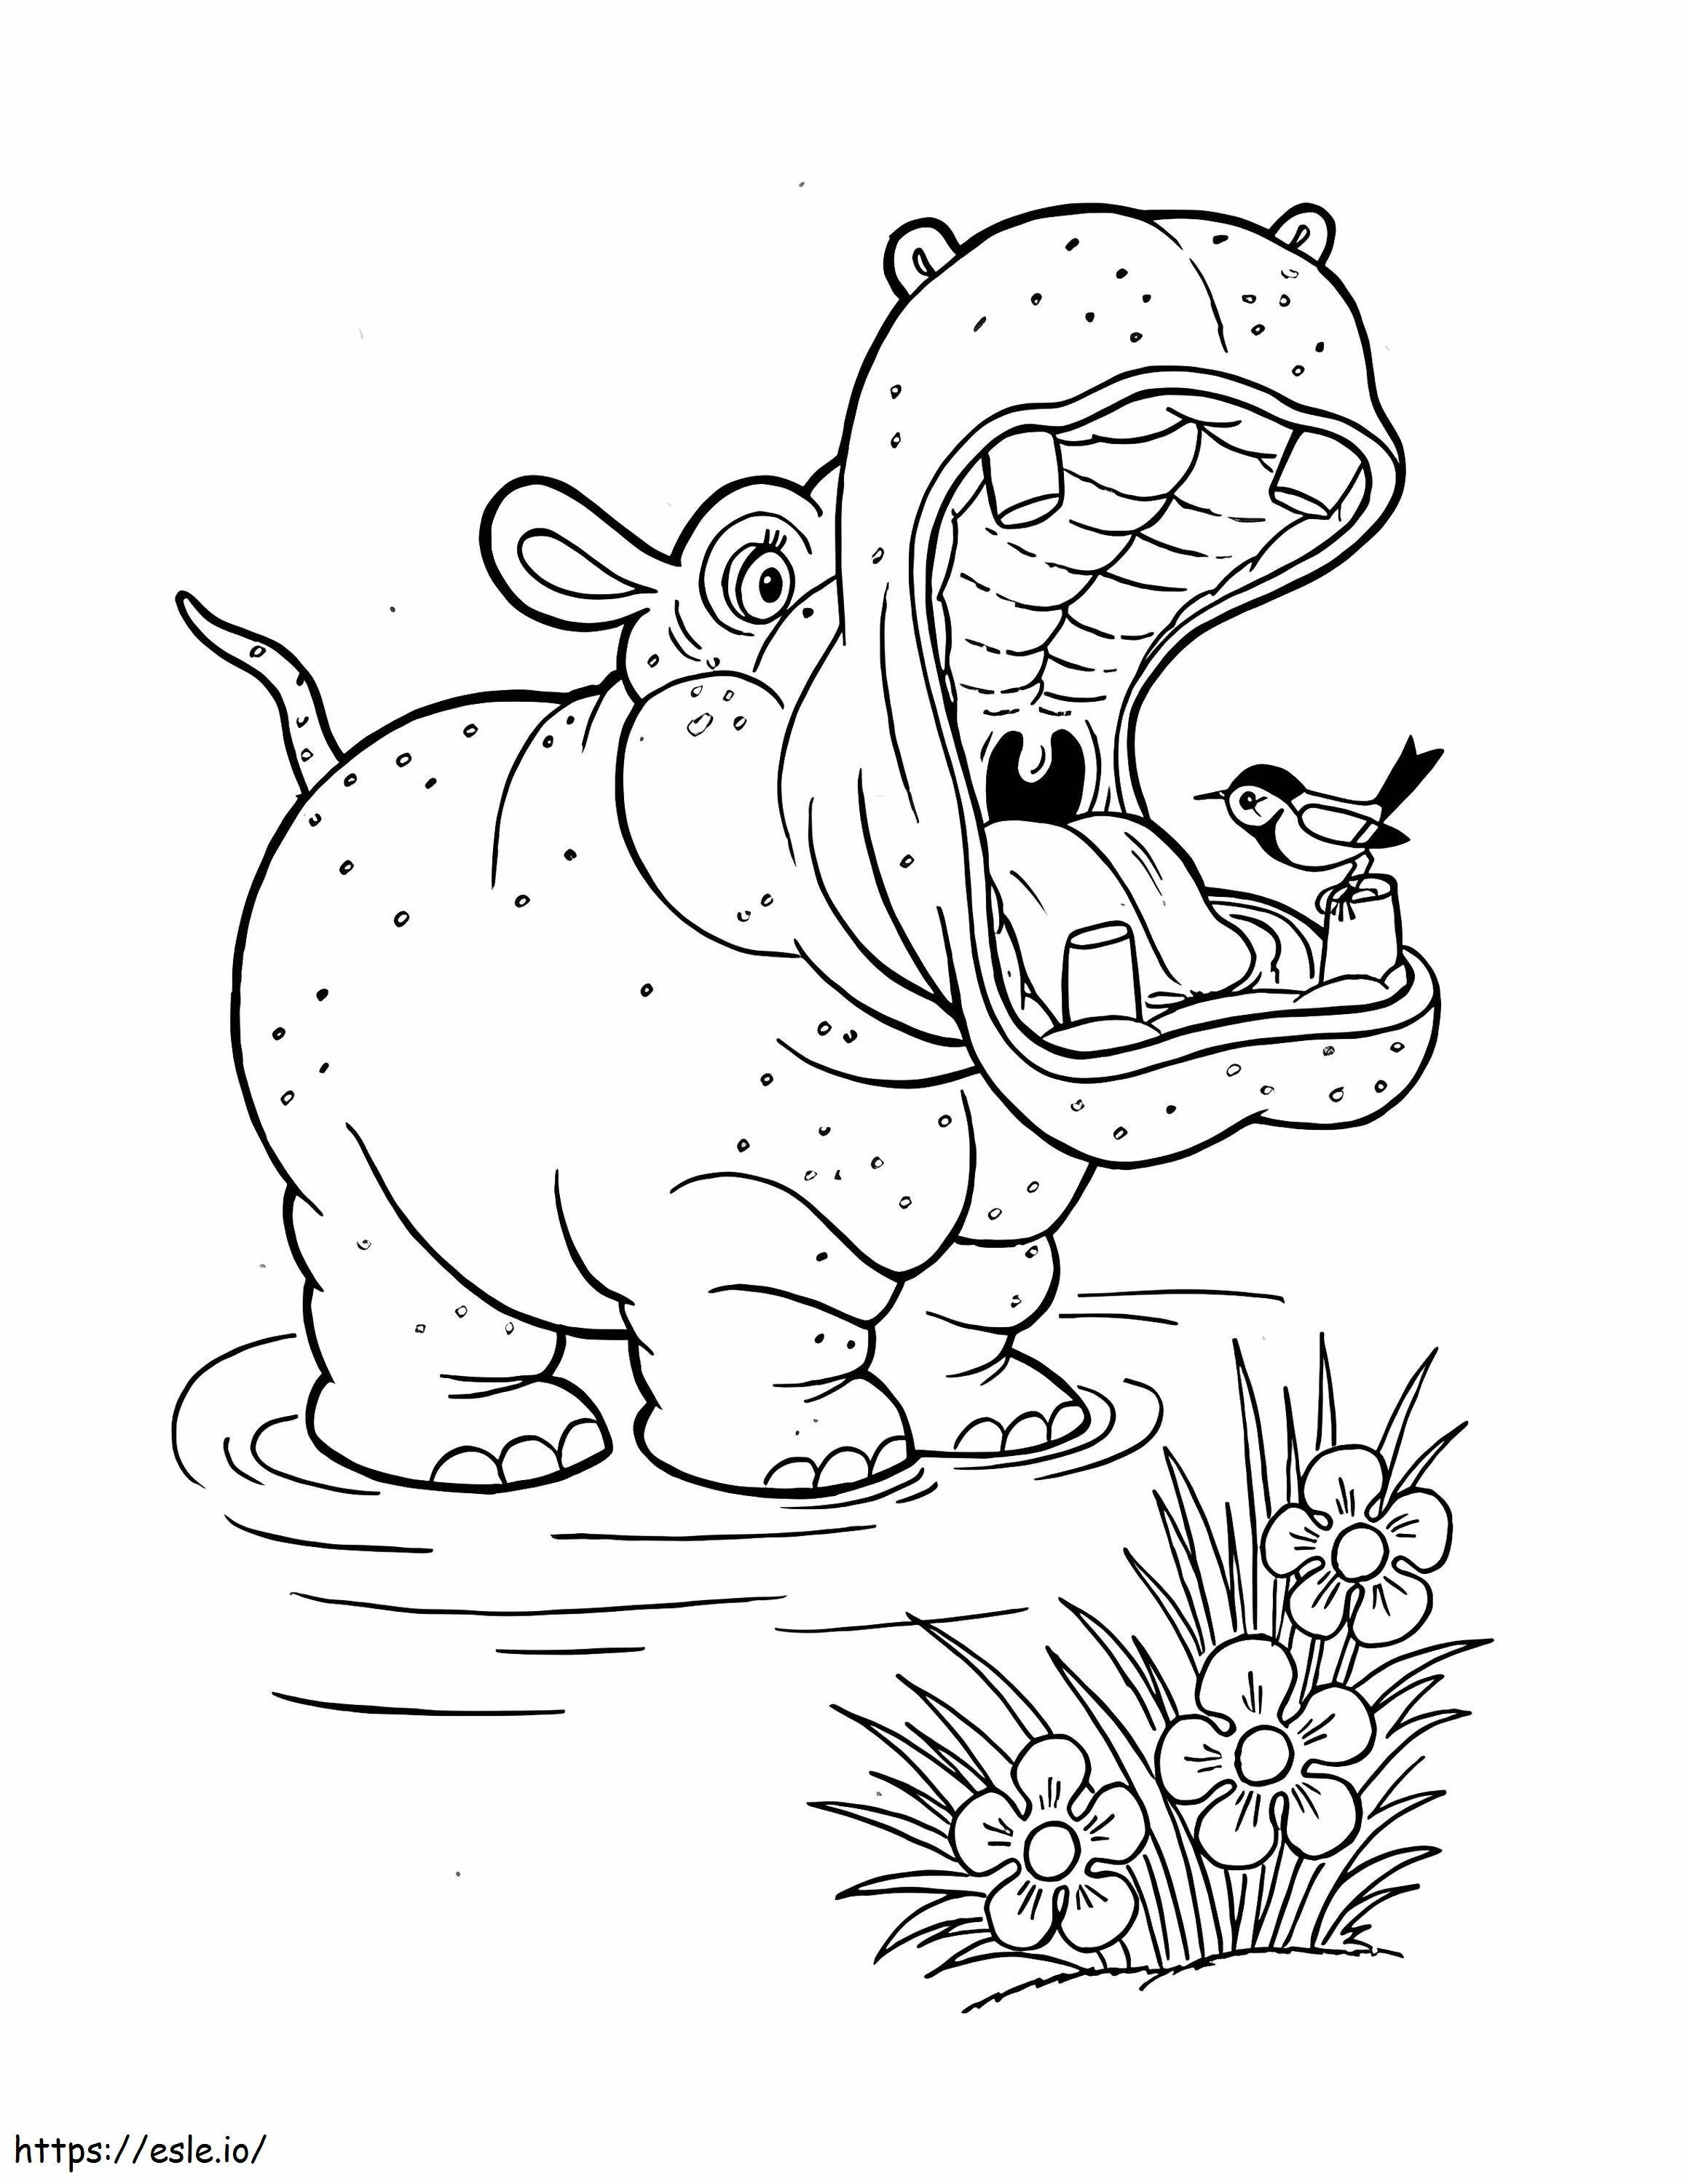 Bird Perched In The Mouth Of The Hippopotamus coloring page